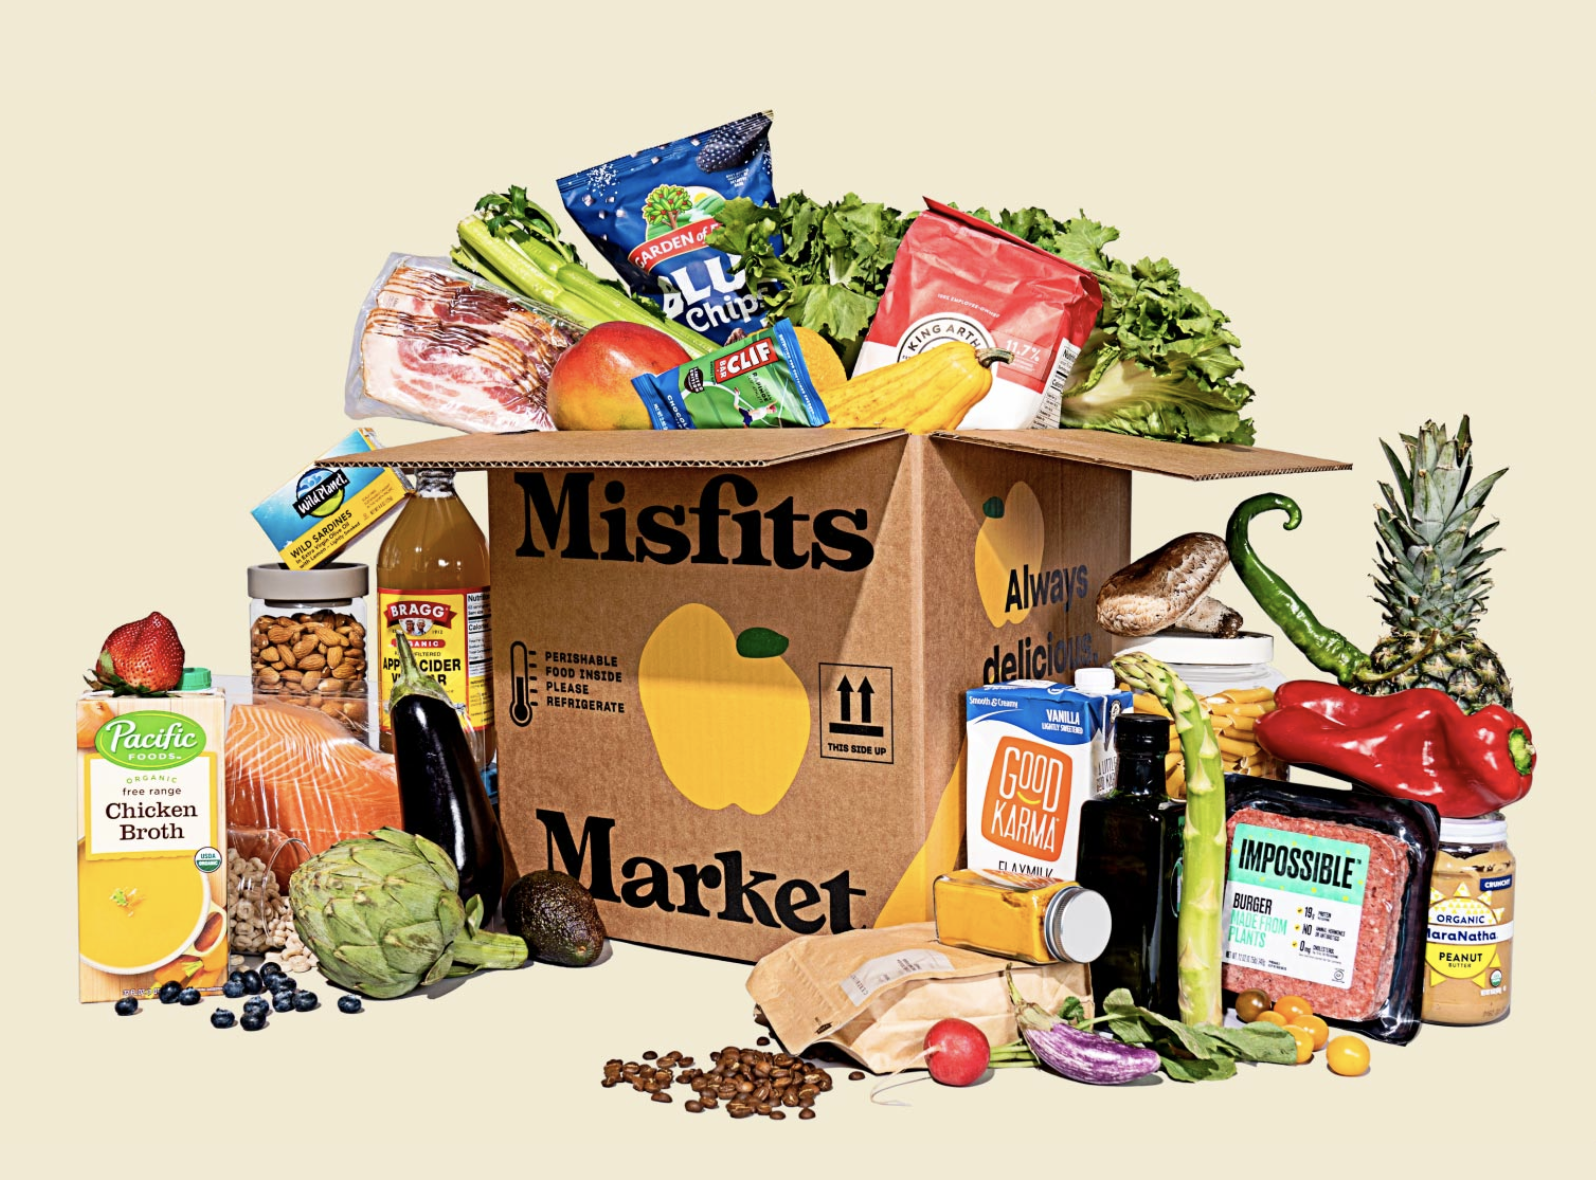 Misfits Market box filled to the brim with produce and other grocery store items